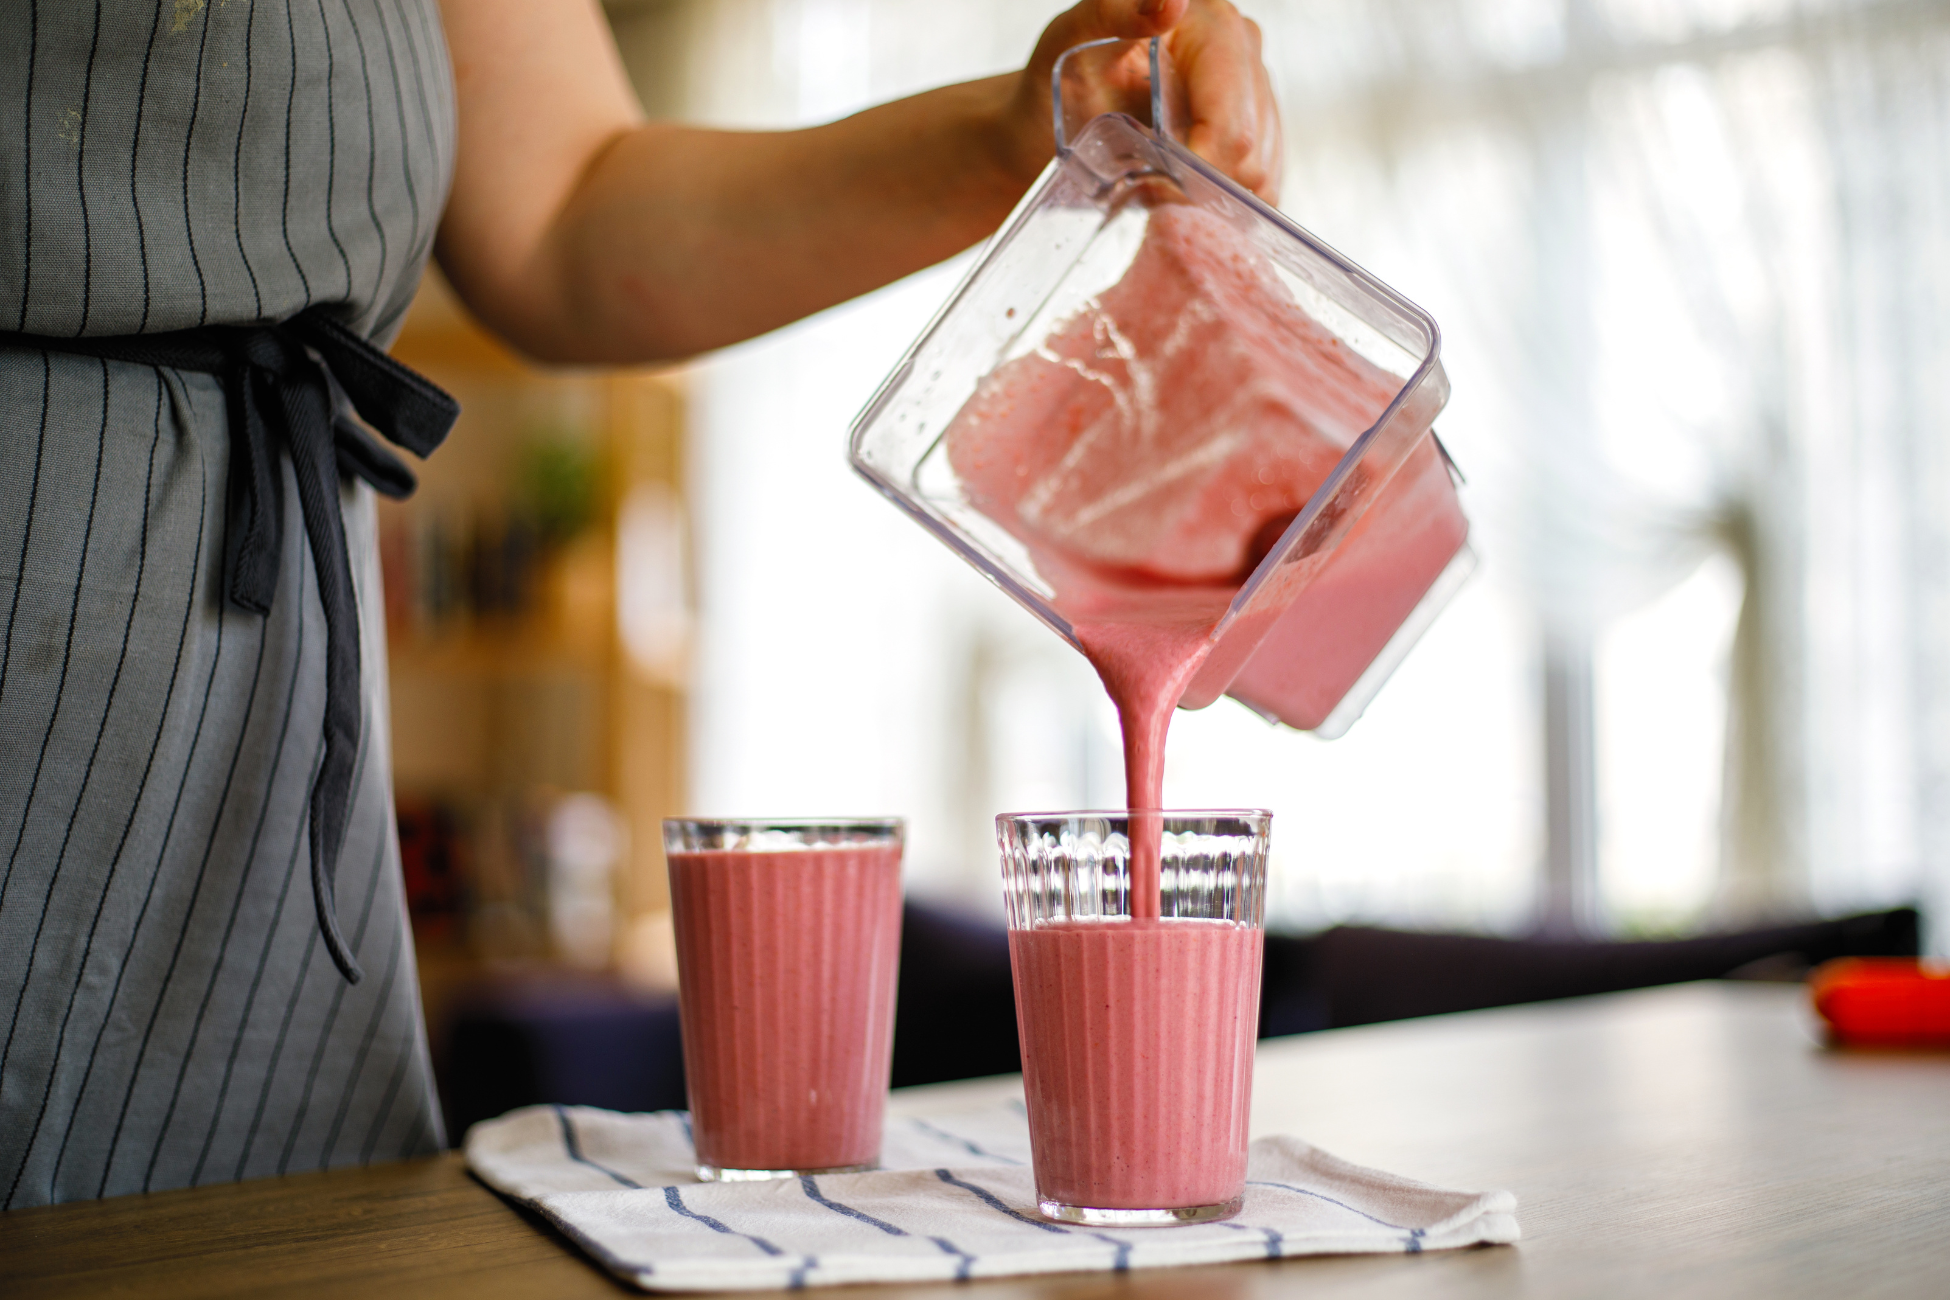 5 Creative Ways to Use Your Blender Beyond Smoothies